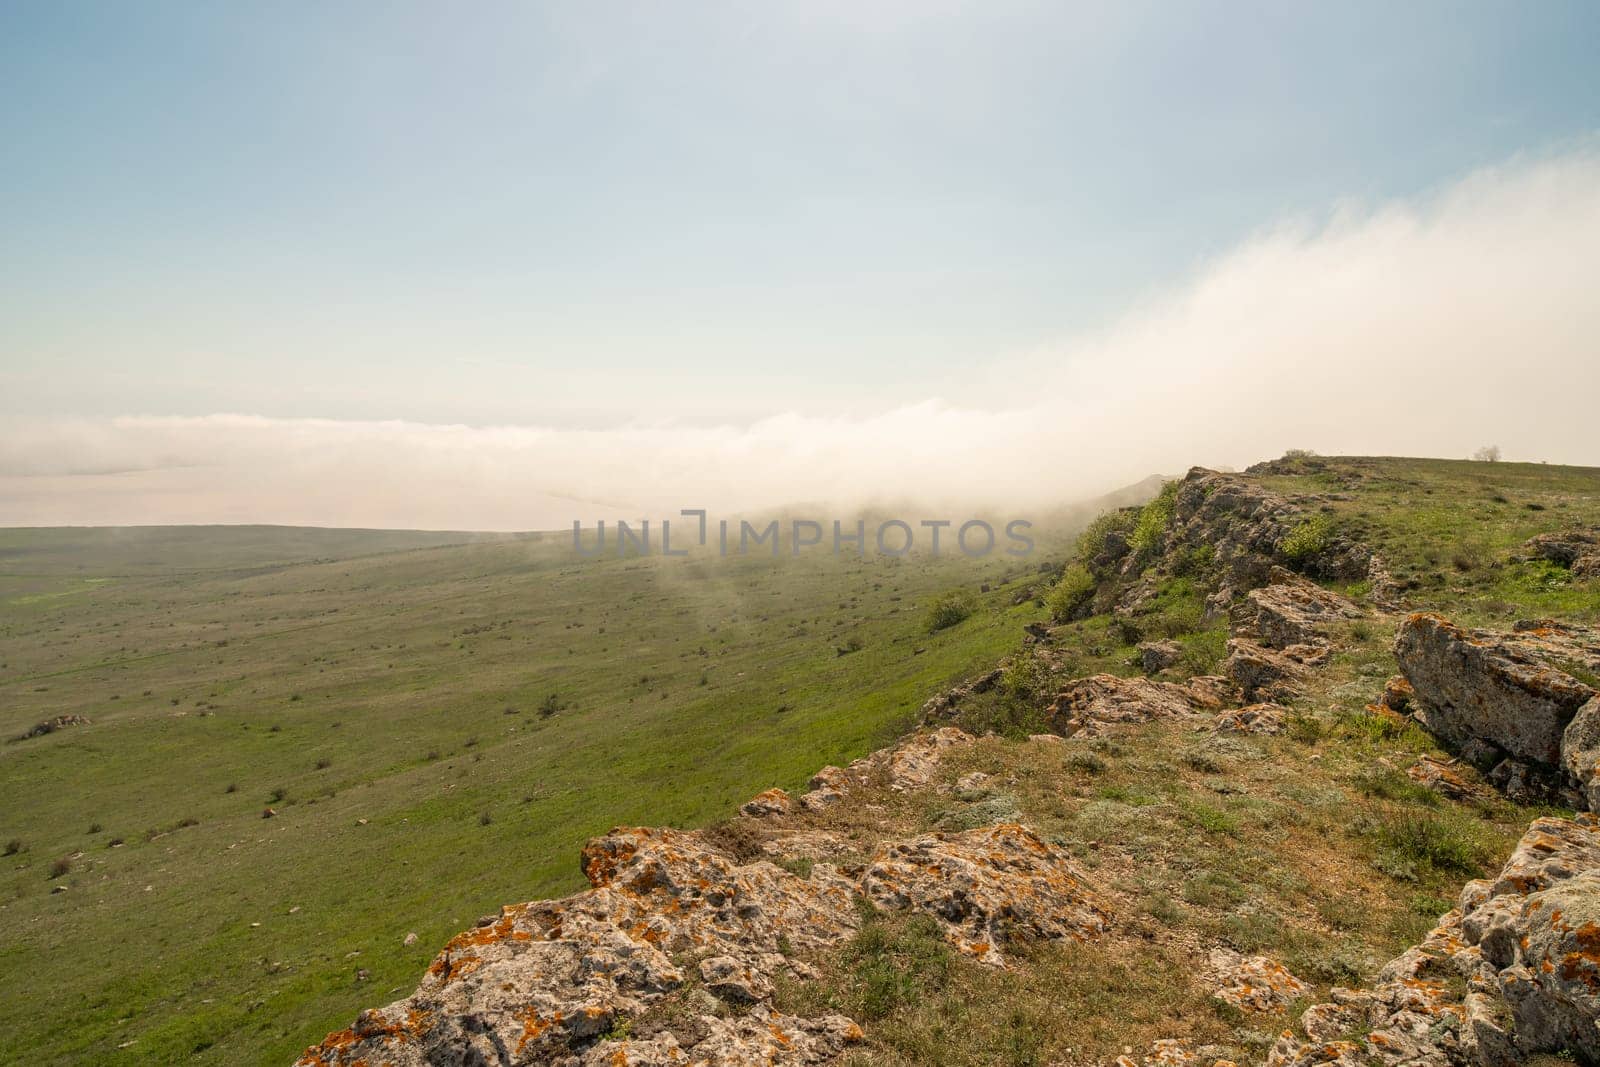 A foggy mountain top with a clear blue sky in the background. The sky is filled with clouds, giving the scene a serene and peaceful atmosphere